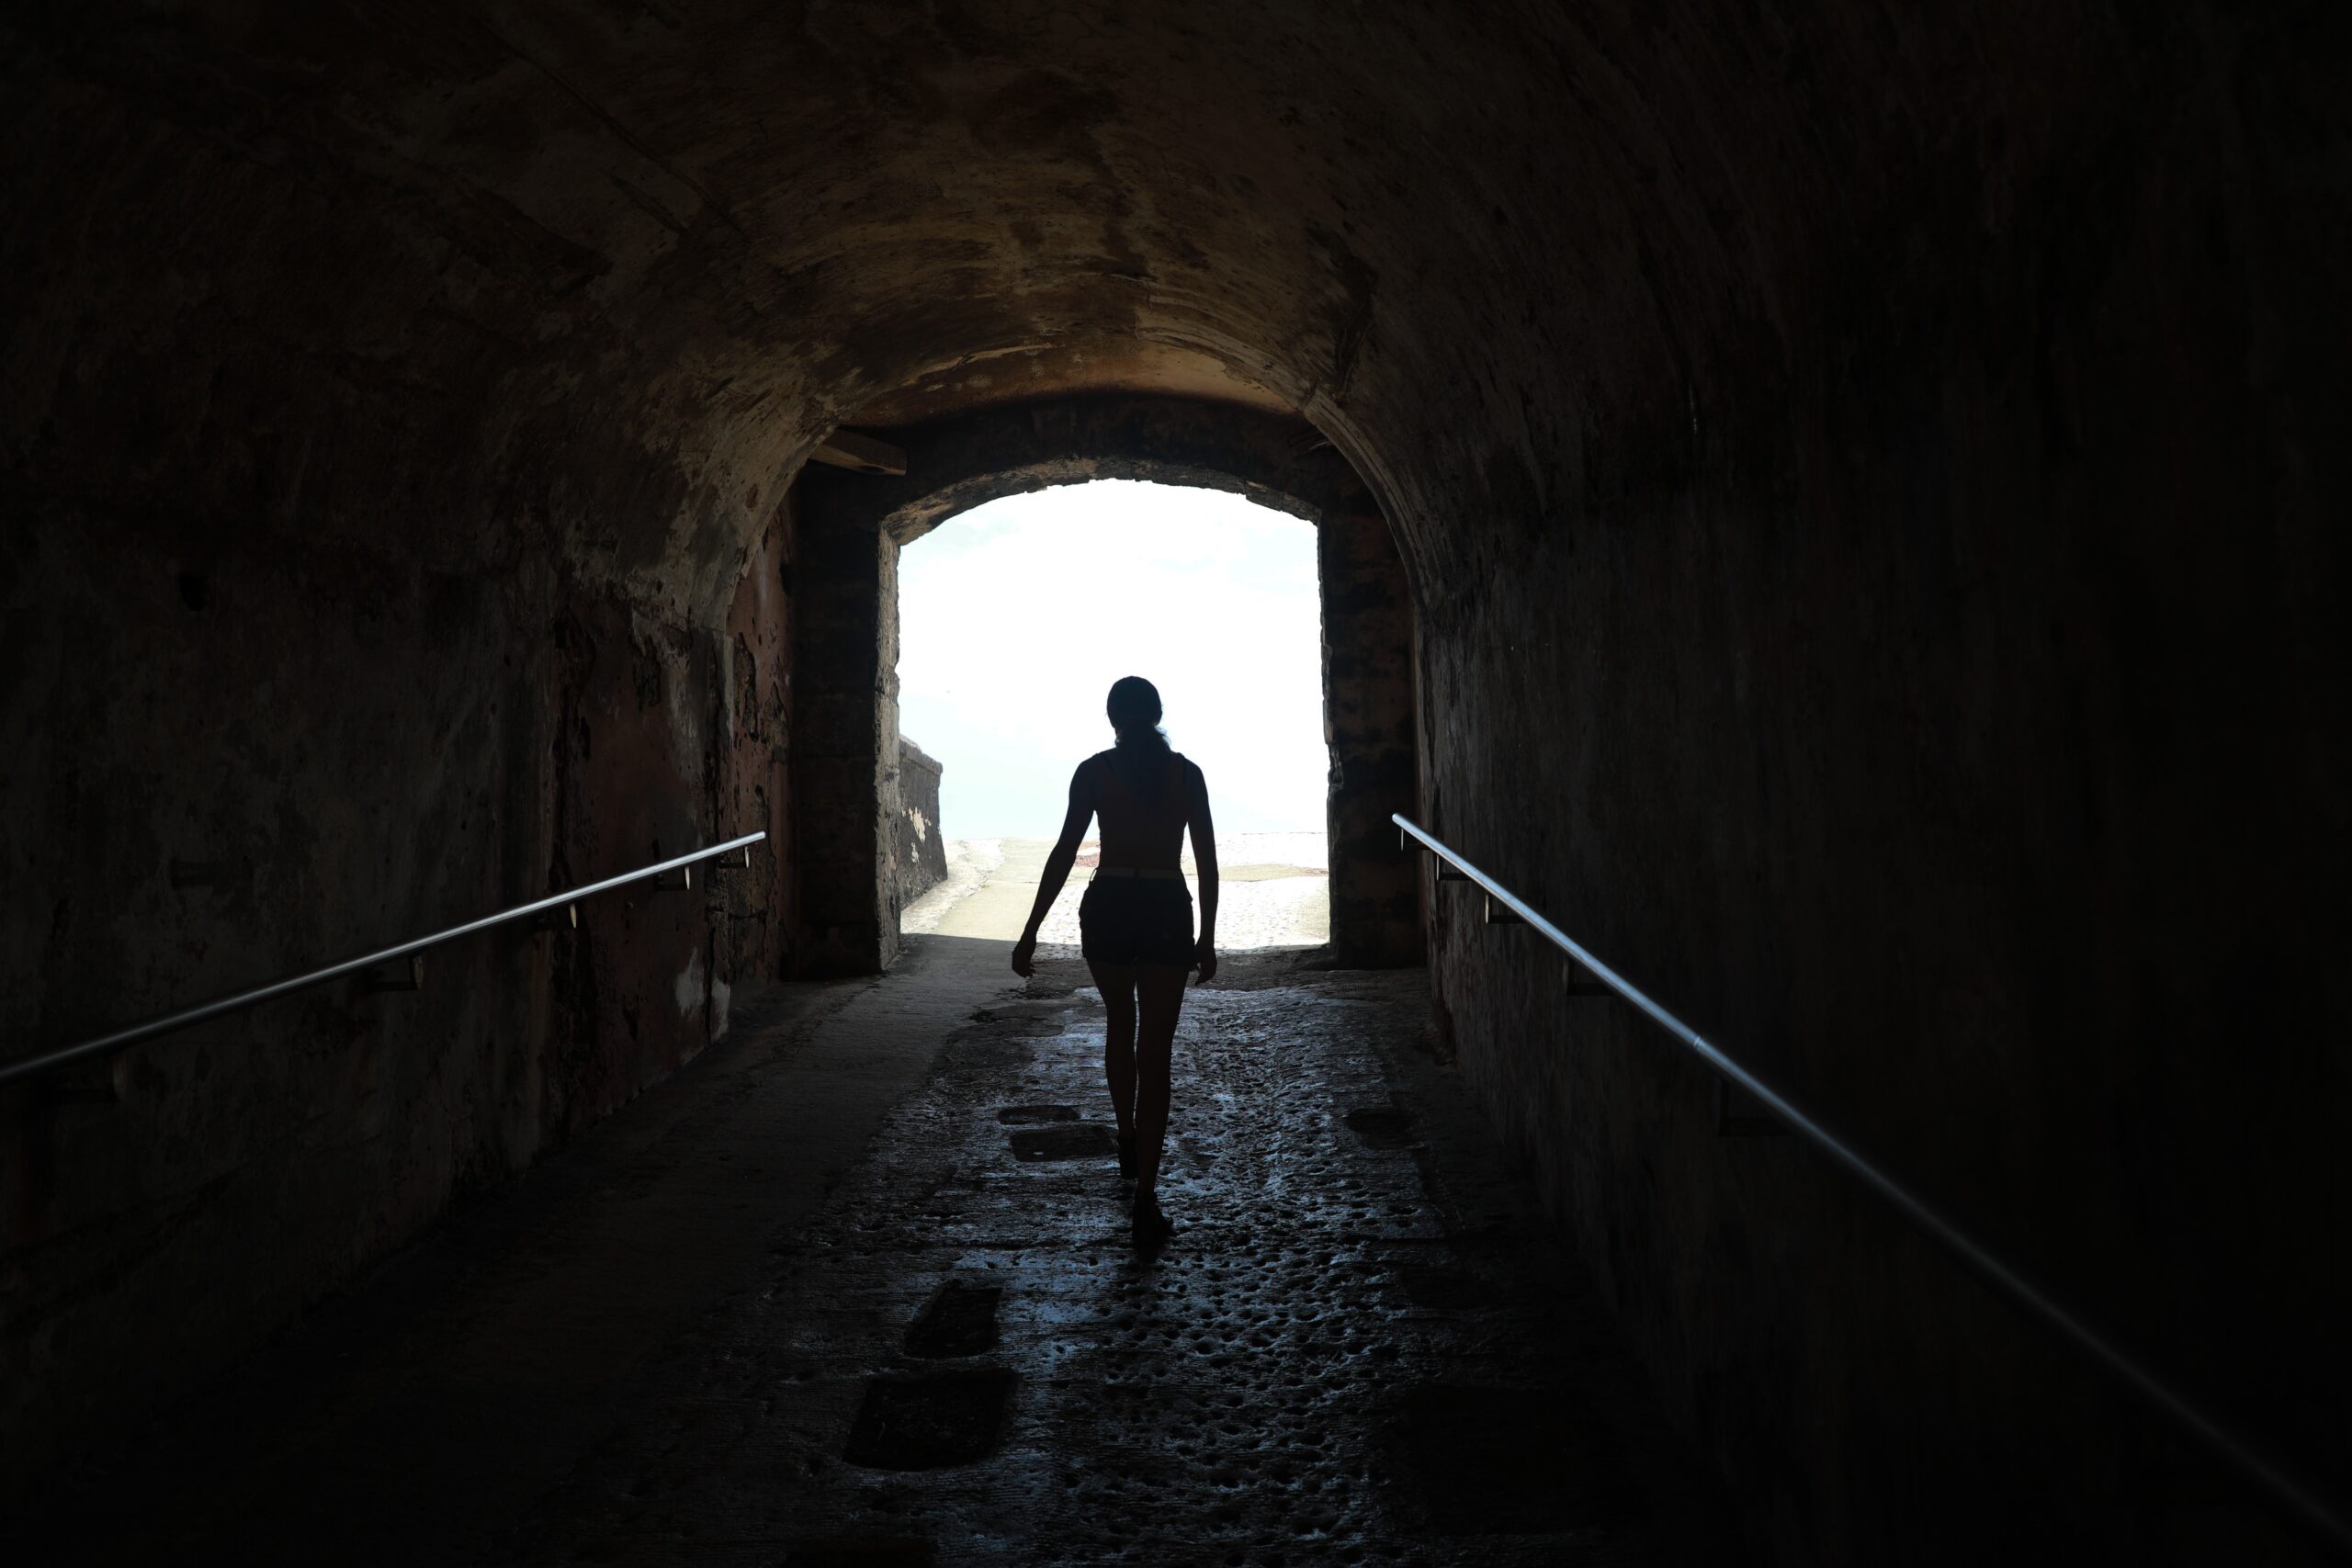 silhouette of person walking alone in a tunnel